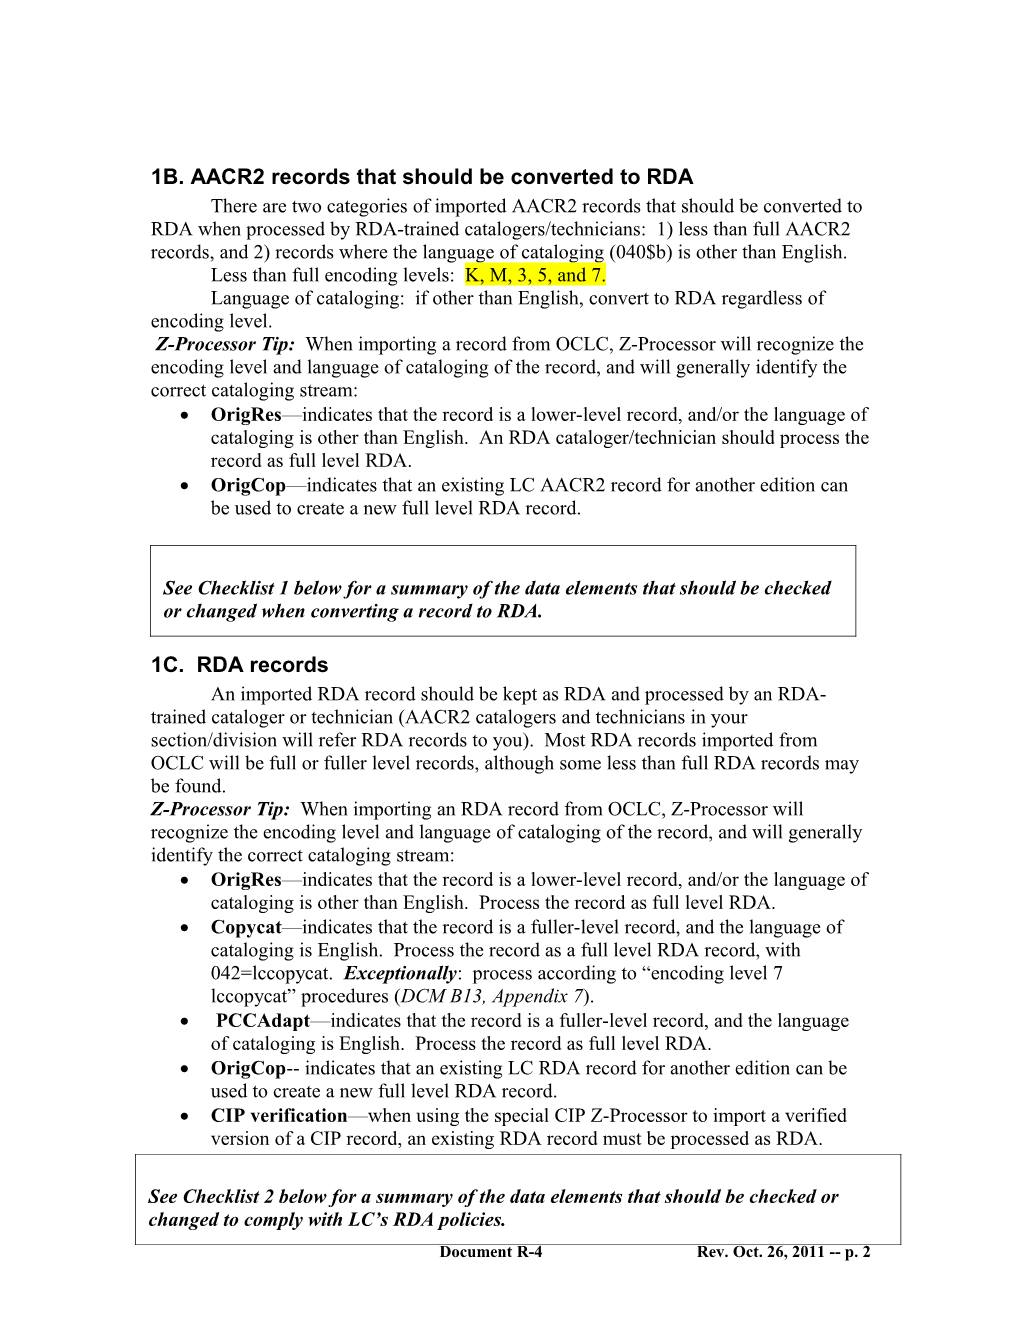 Summary of Steps to Change a Record from AACR2 to RDA